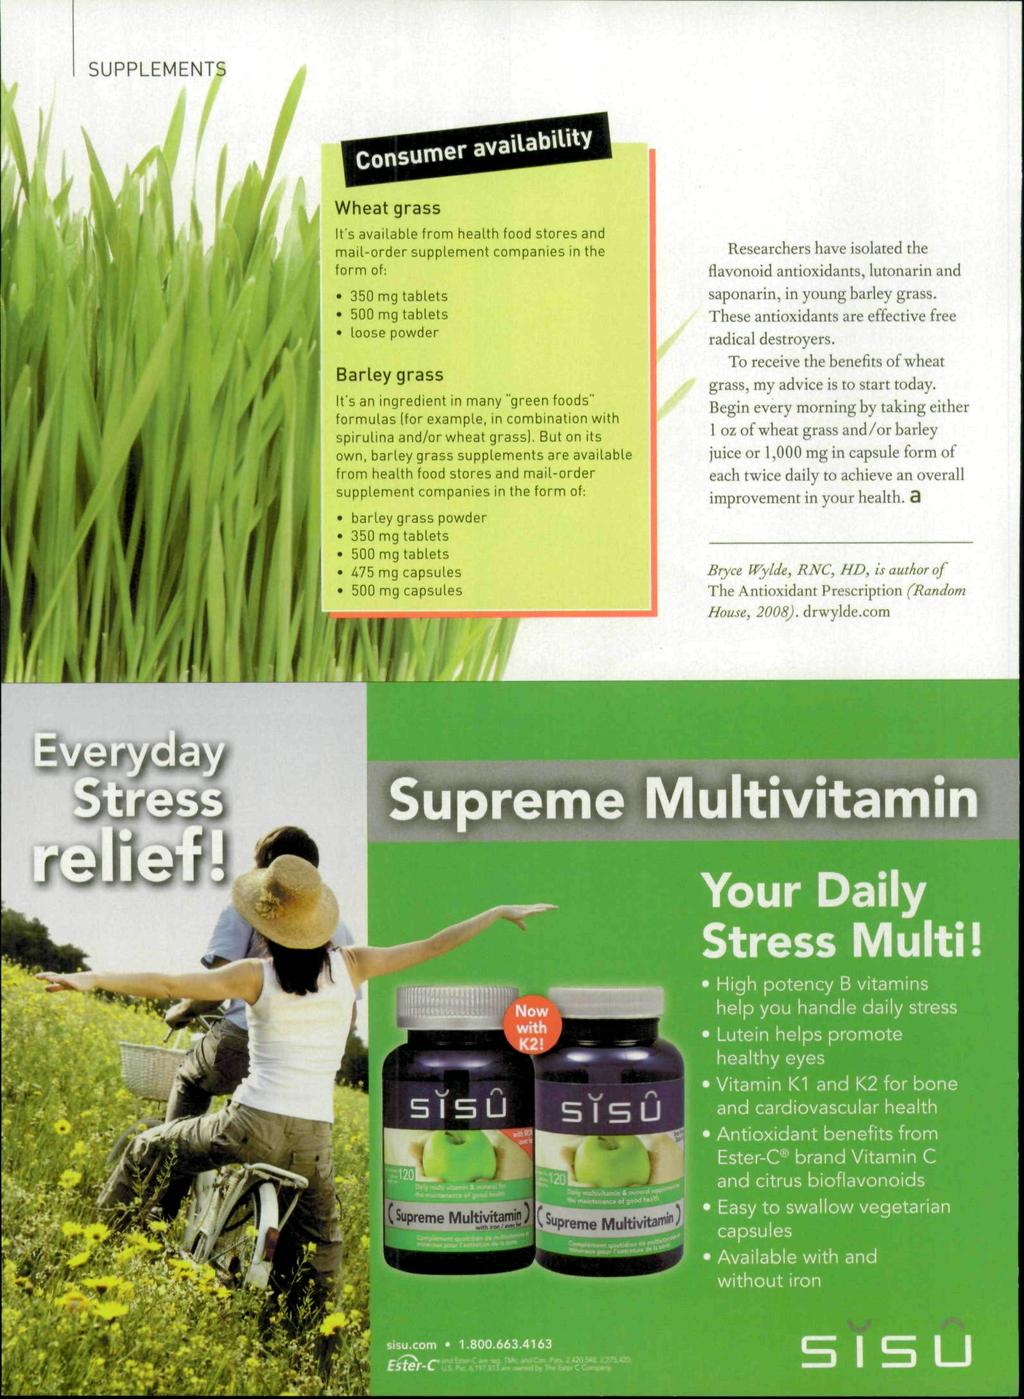 Wheat grass It's available from health food stores and mail-order supplement companies in the form of: 35Û mg tablets 500 mg tablets loose powder Barley grass It's an ingredient in many "green foods"